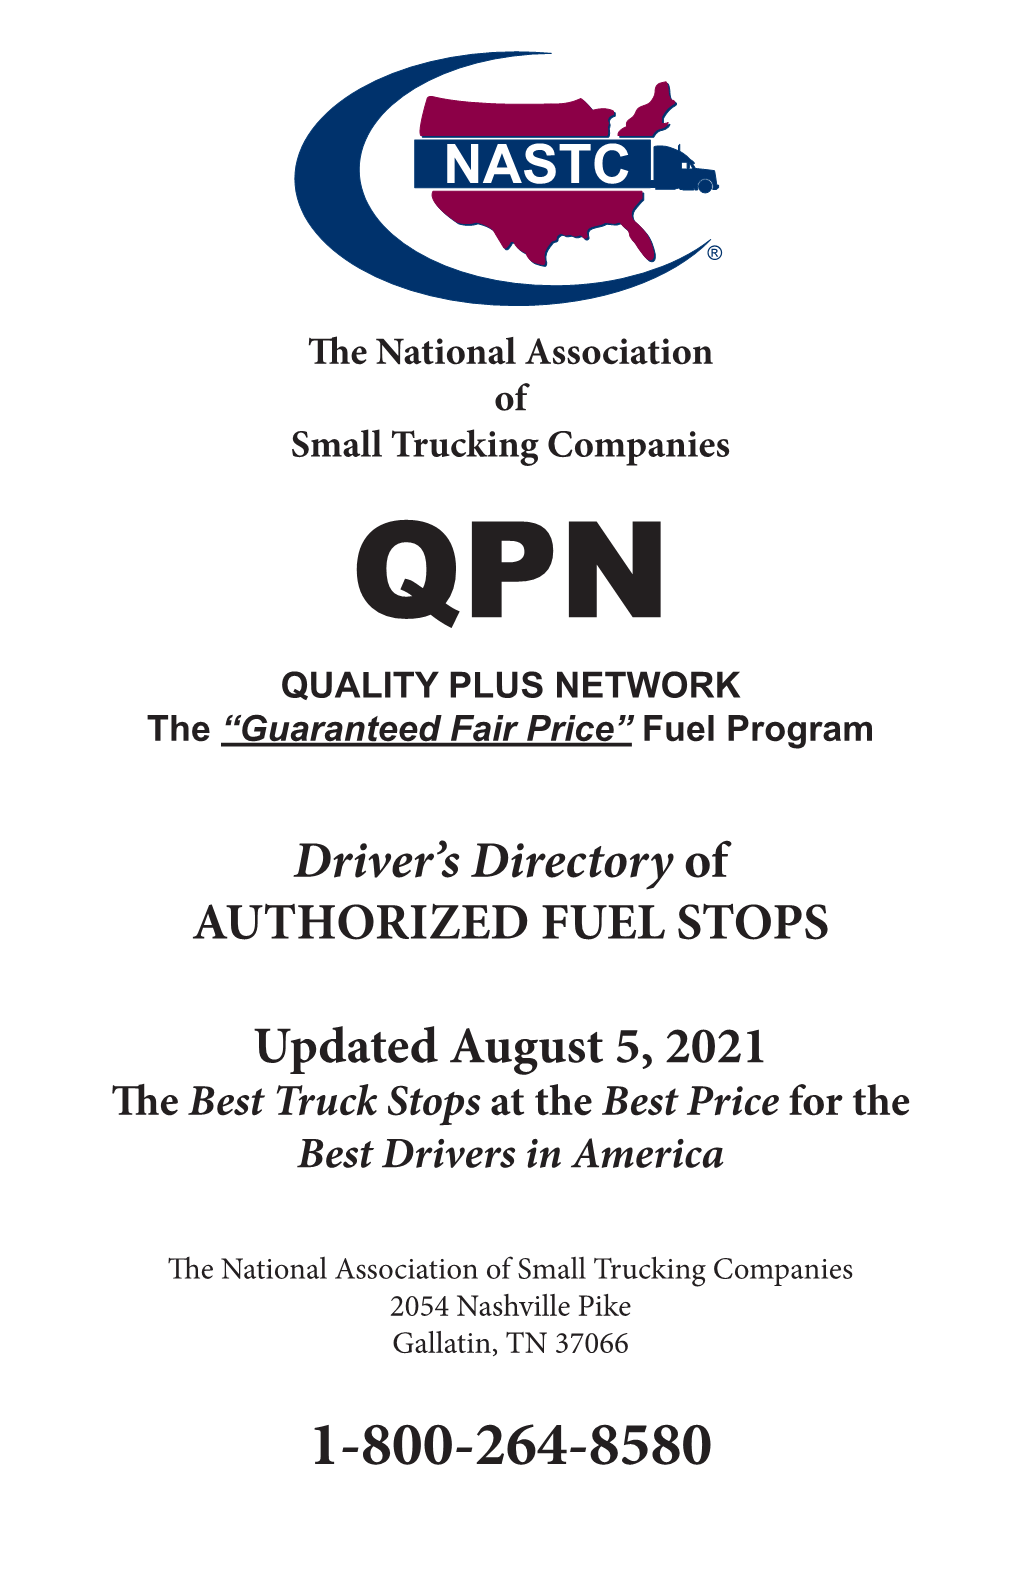 Download the NASTC QPN Fuel Directory Here